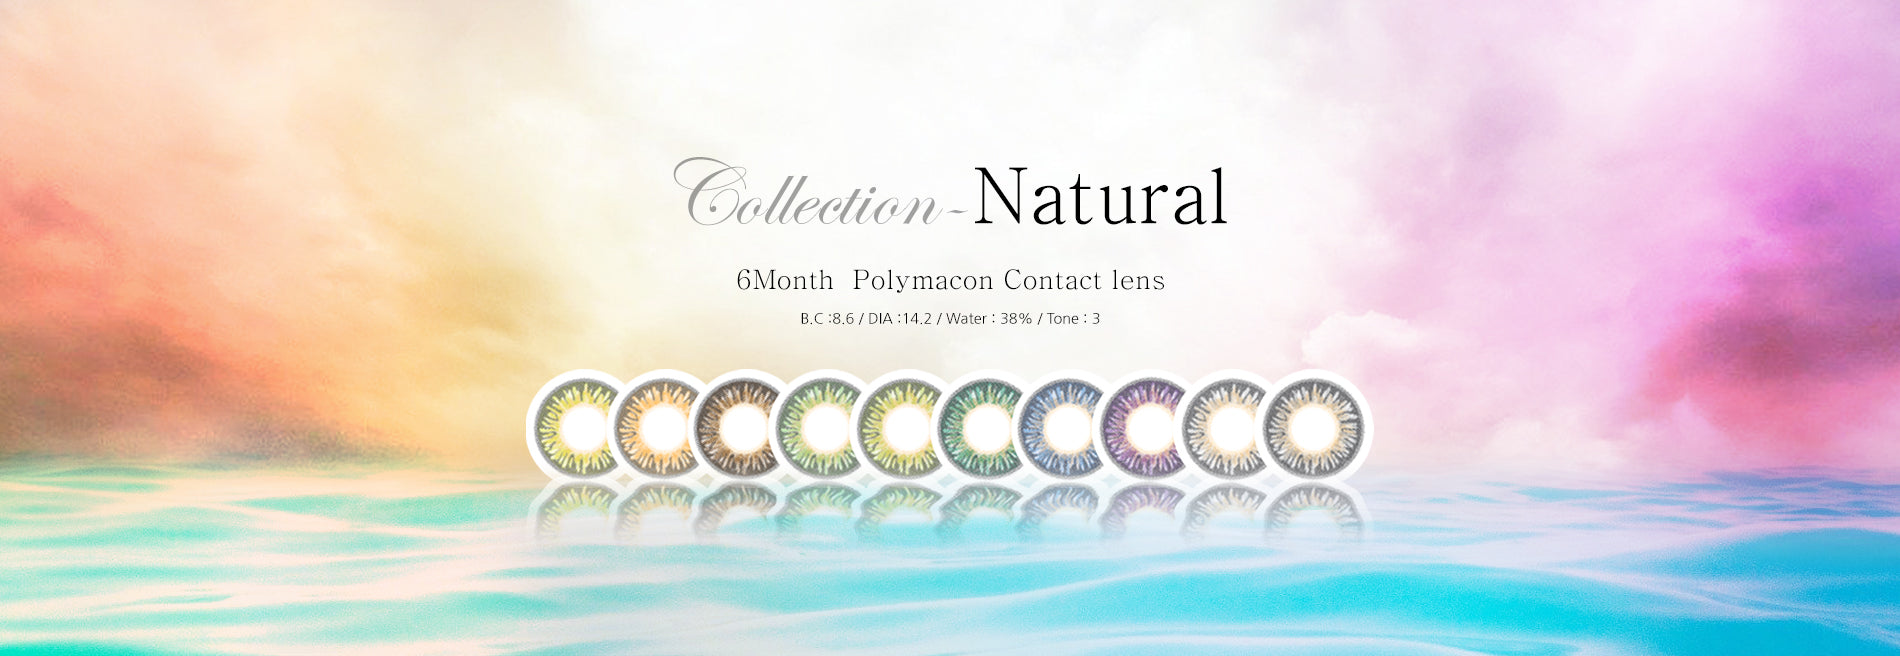 natural collection lenses from krazyeyes4u has beautiful lens pattern on it.